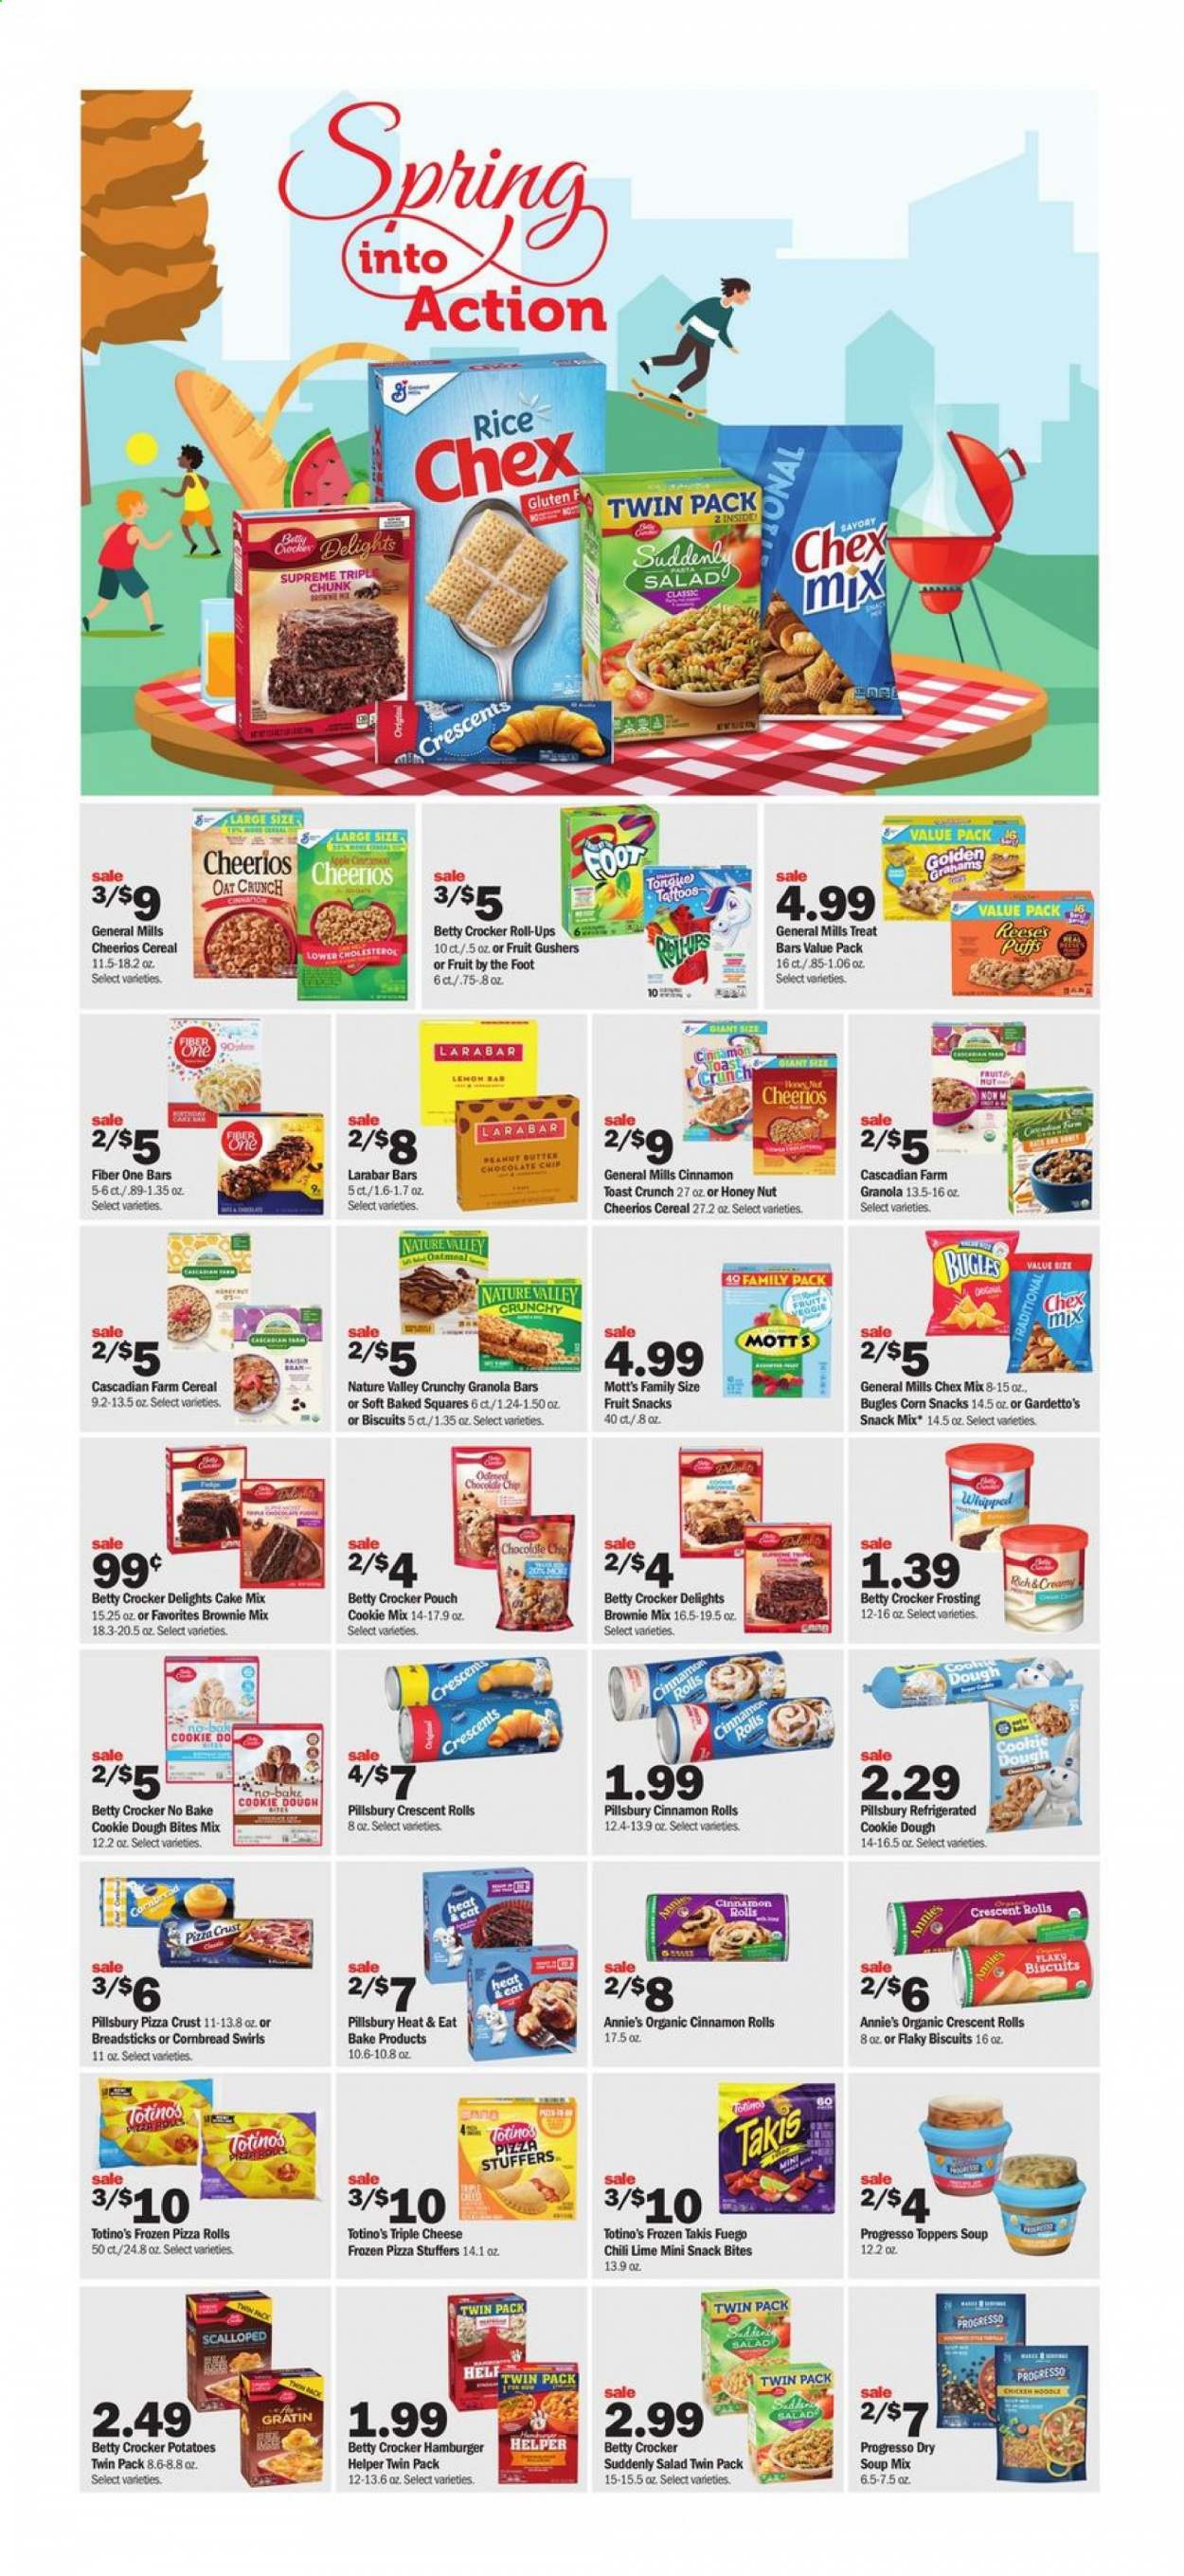 thumbnail - Meijer Flyer - 05/02/2021 - 05/08/2021 - Sales products - pizza rolls, cinnamon roll, crescent rolls, brownie mix, cake mix, corn, potatoes, salad, Mott's, pizza, soup mix, soup, Pillsbury, Progresso, Annie's, butter, Reese's, cookie dough, fudge, chocolate chips, biscuit, fruit snack, bread sticks, Chex Mix, frosting, oats, cereals, Cheerios, granola bar, Nature Valley, Fiber One, rice, pan. Page 7.